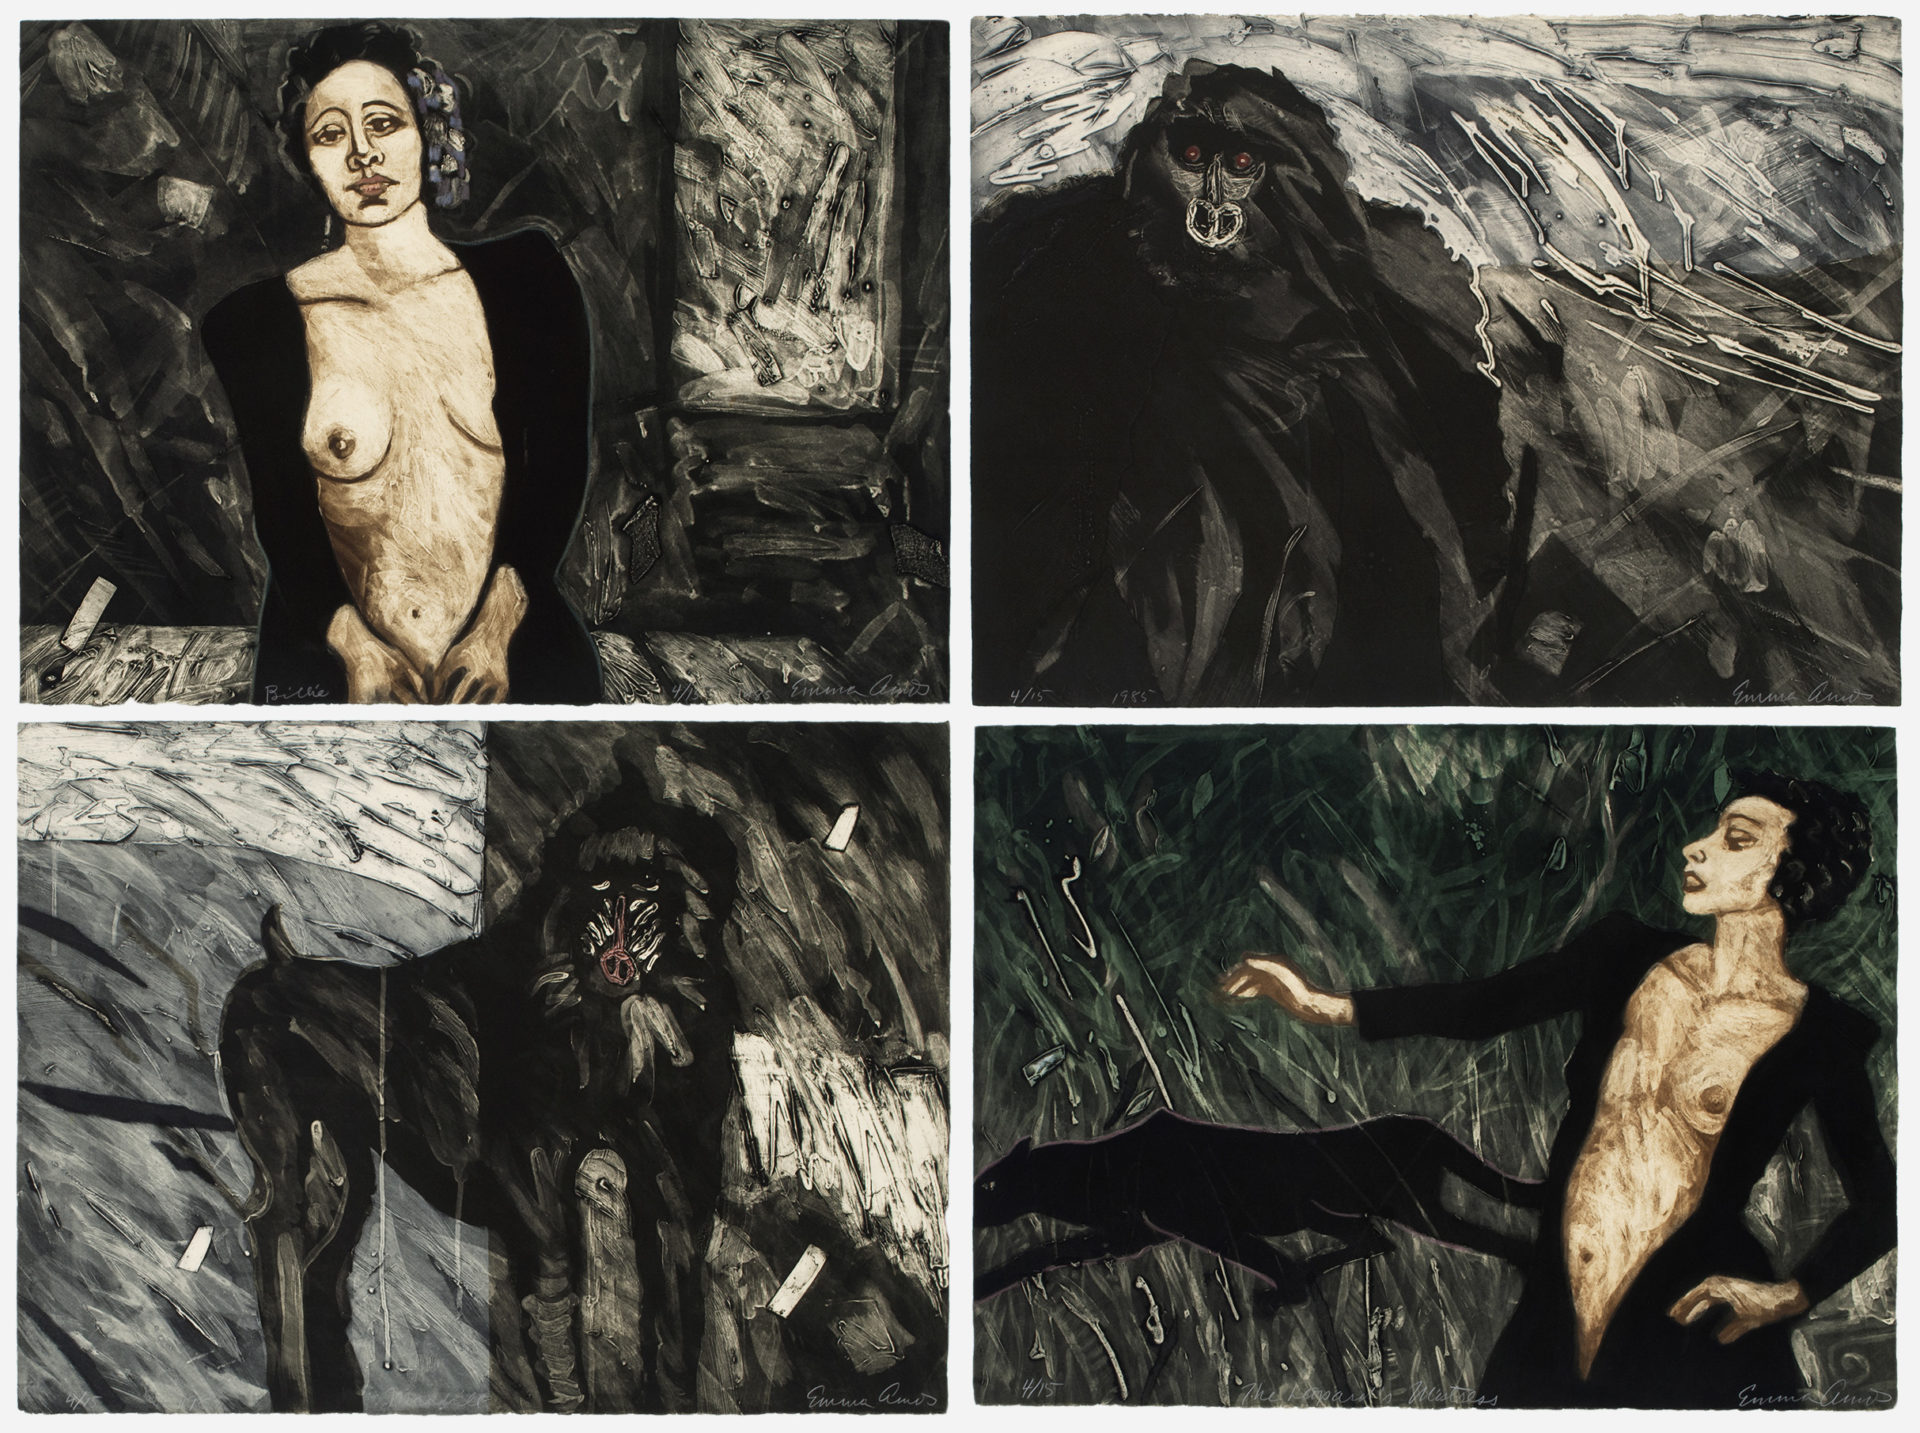 EMMA AMOS (b. 1937, Atlanta, GA – d. 2020, Bedford, NH) Creatures of the Night, 1985 Set of 4 intaglio printed silk collagraphs 22 x 30 inches (55.9 x 76.2 cm) each Edition of 15